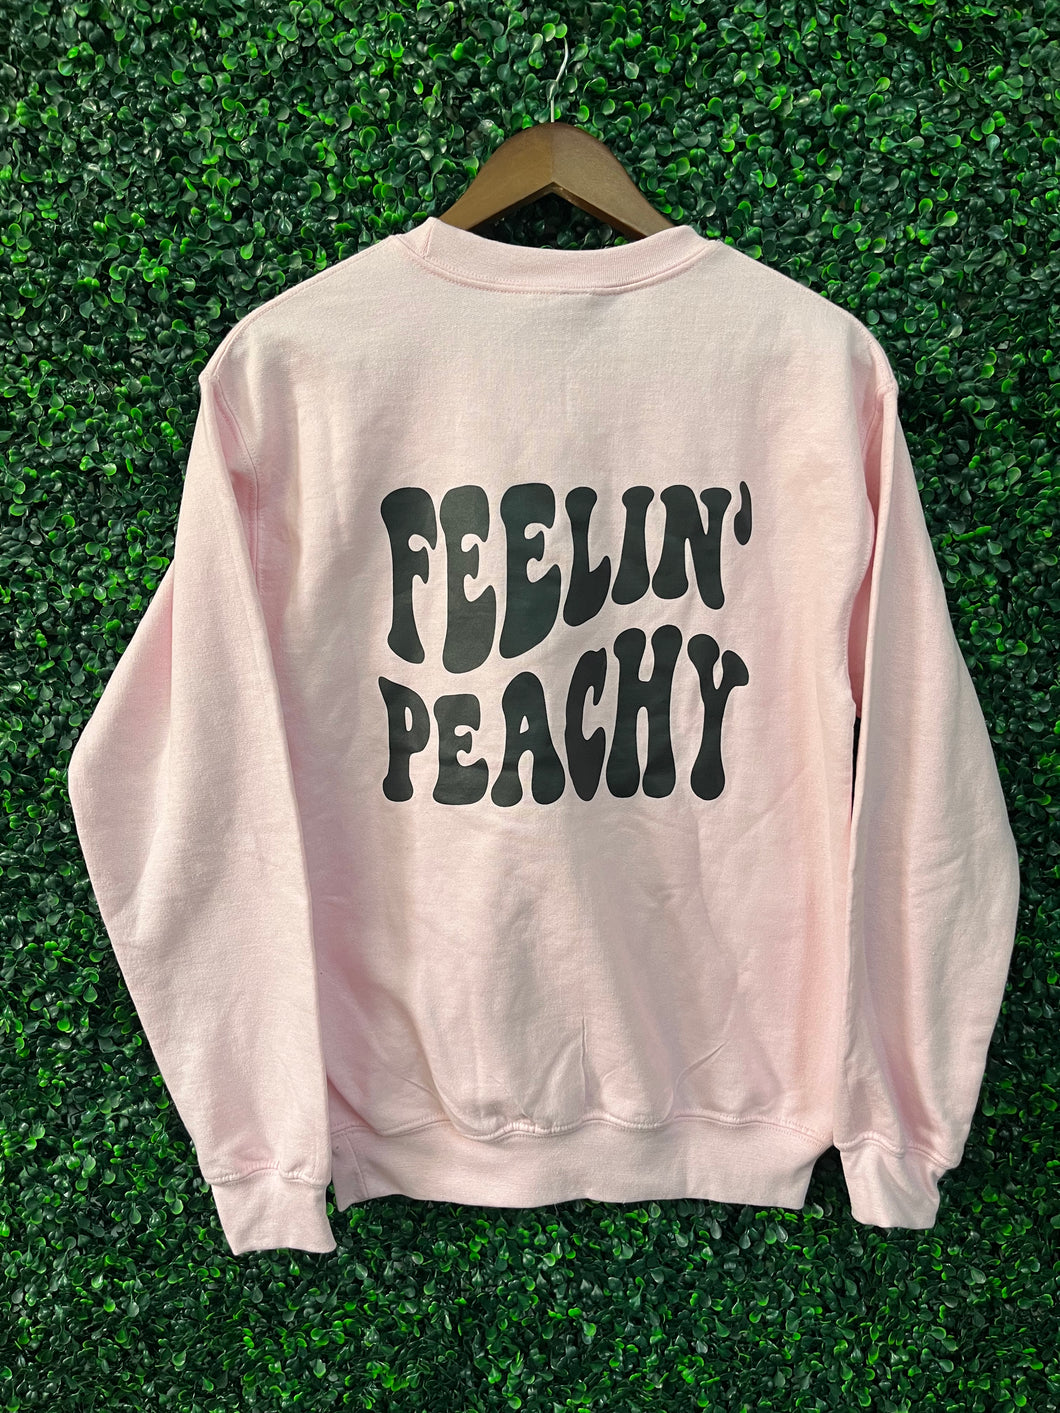 SIZE SMALL Feelin peachy front and back crewneck